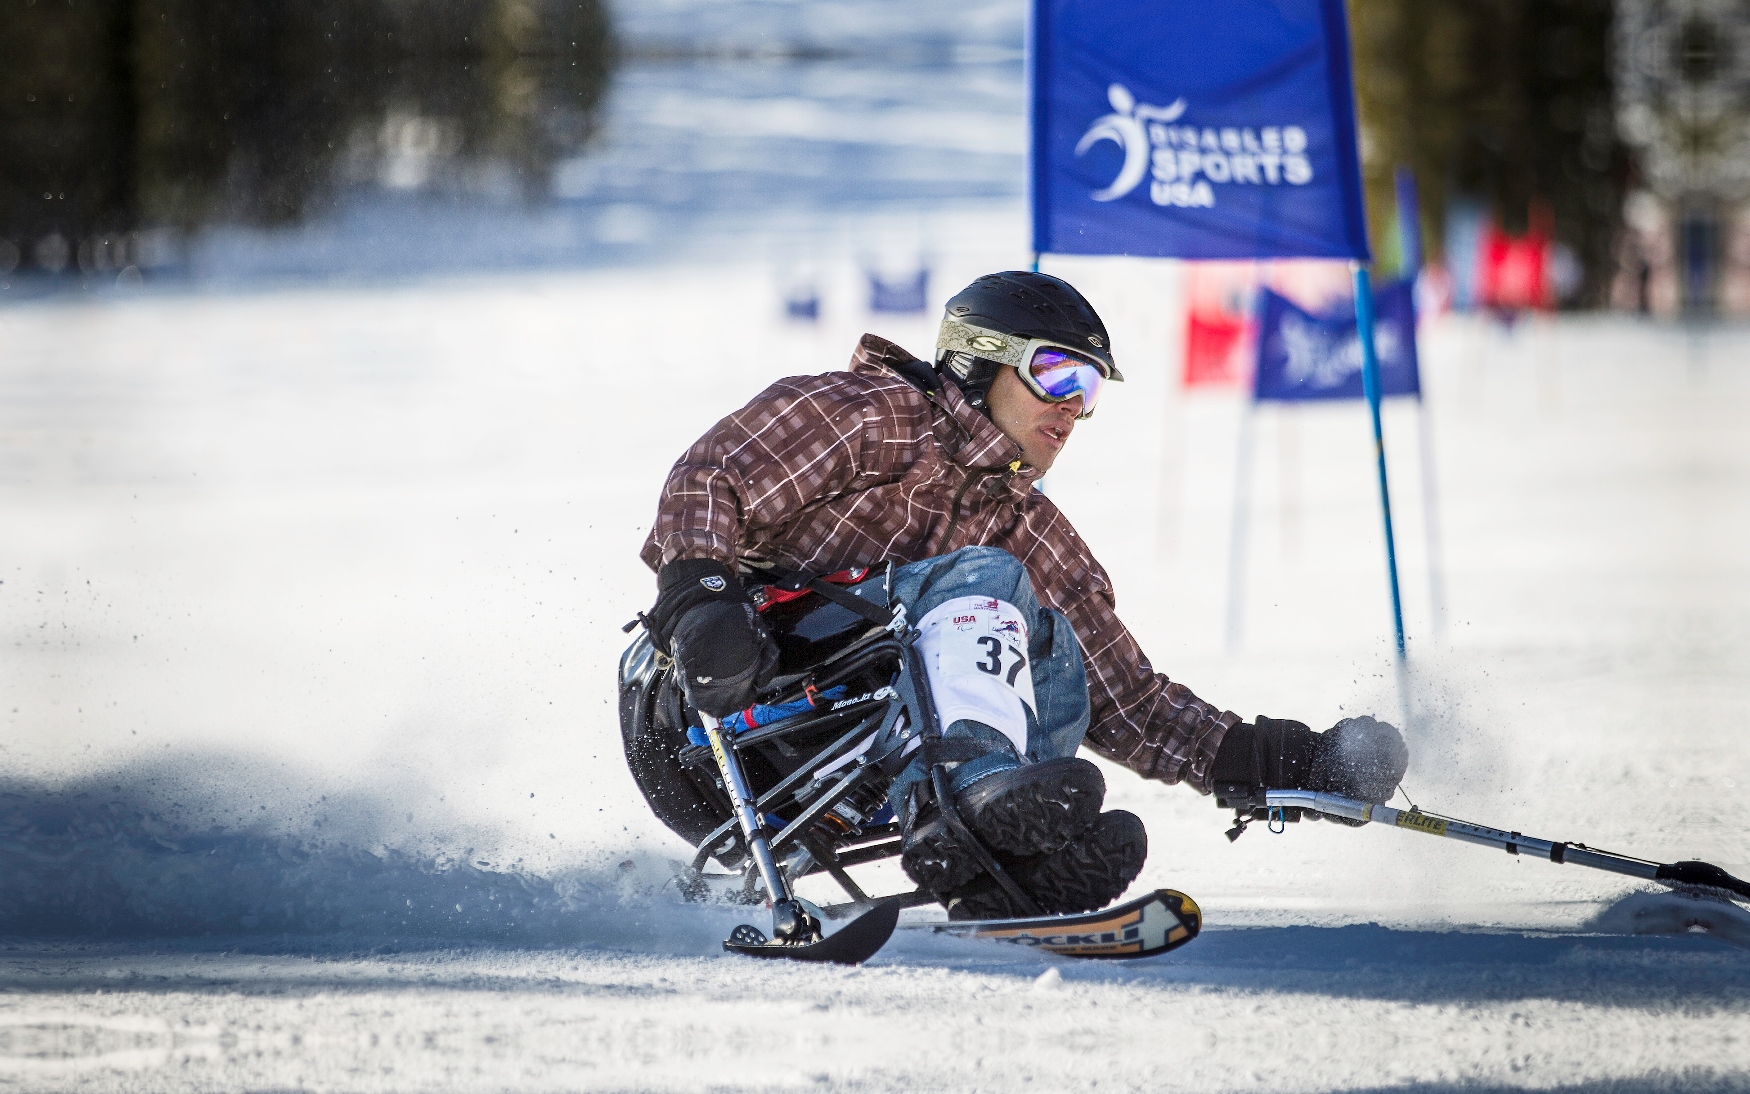 Wounded warrior Anthony R. mono-skiing at The Hartford Ski Spectacular